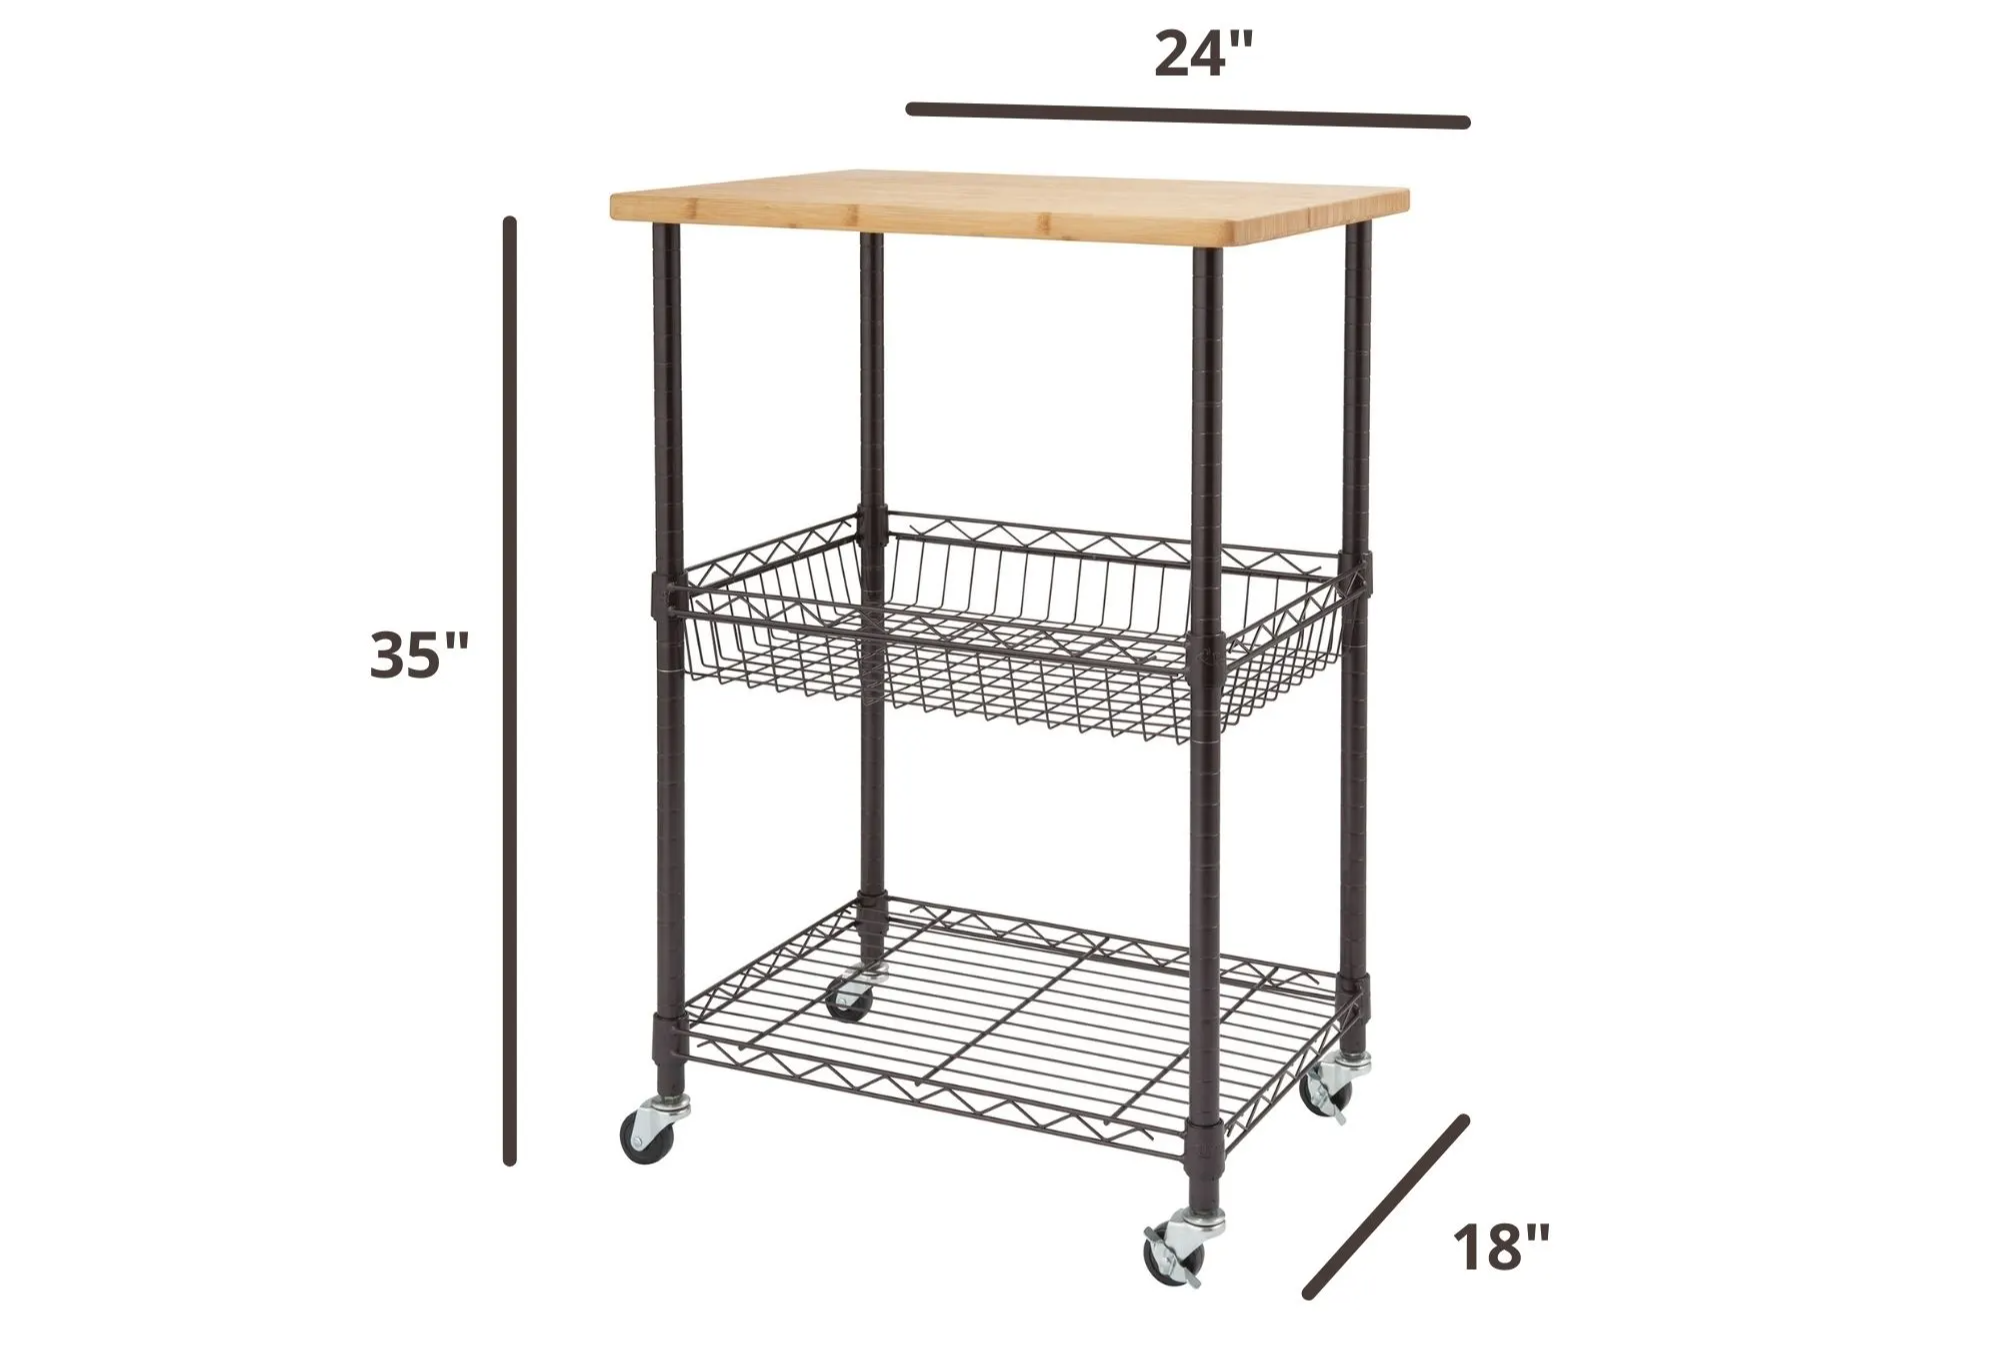 24 inches wide by 18 inches deep by 35 inches tall kitchen cart